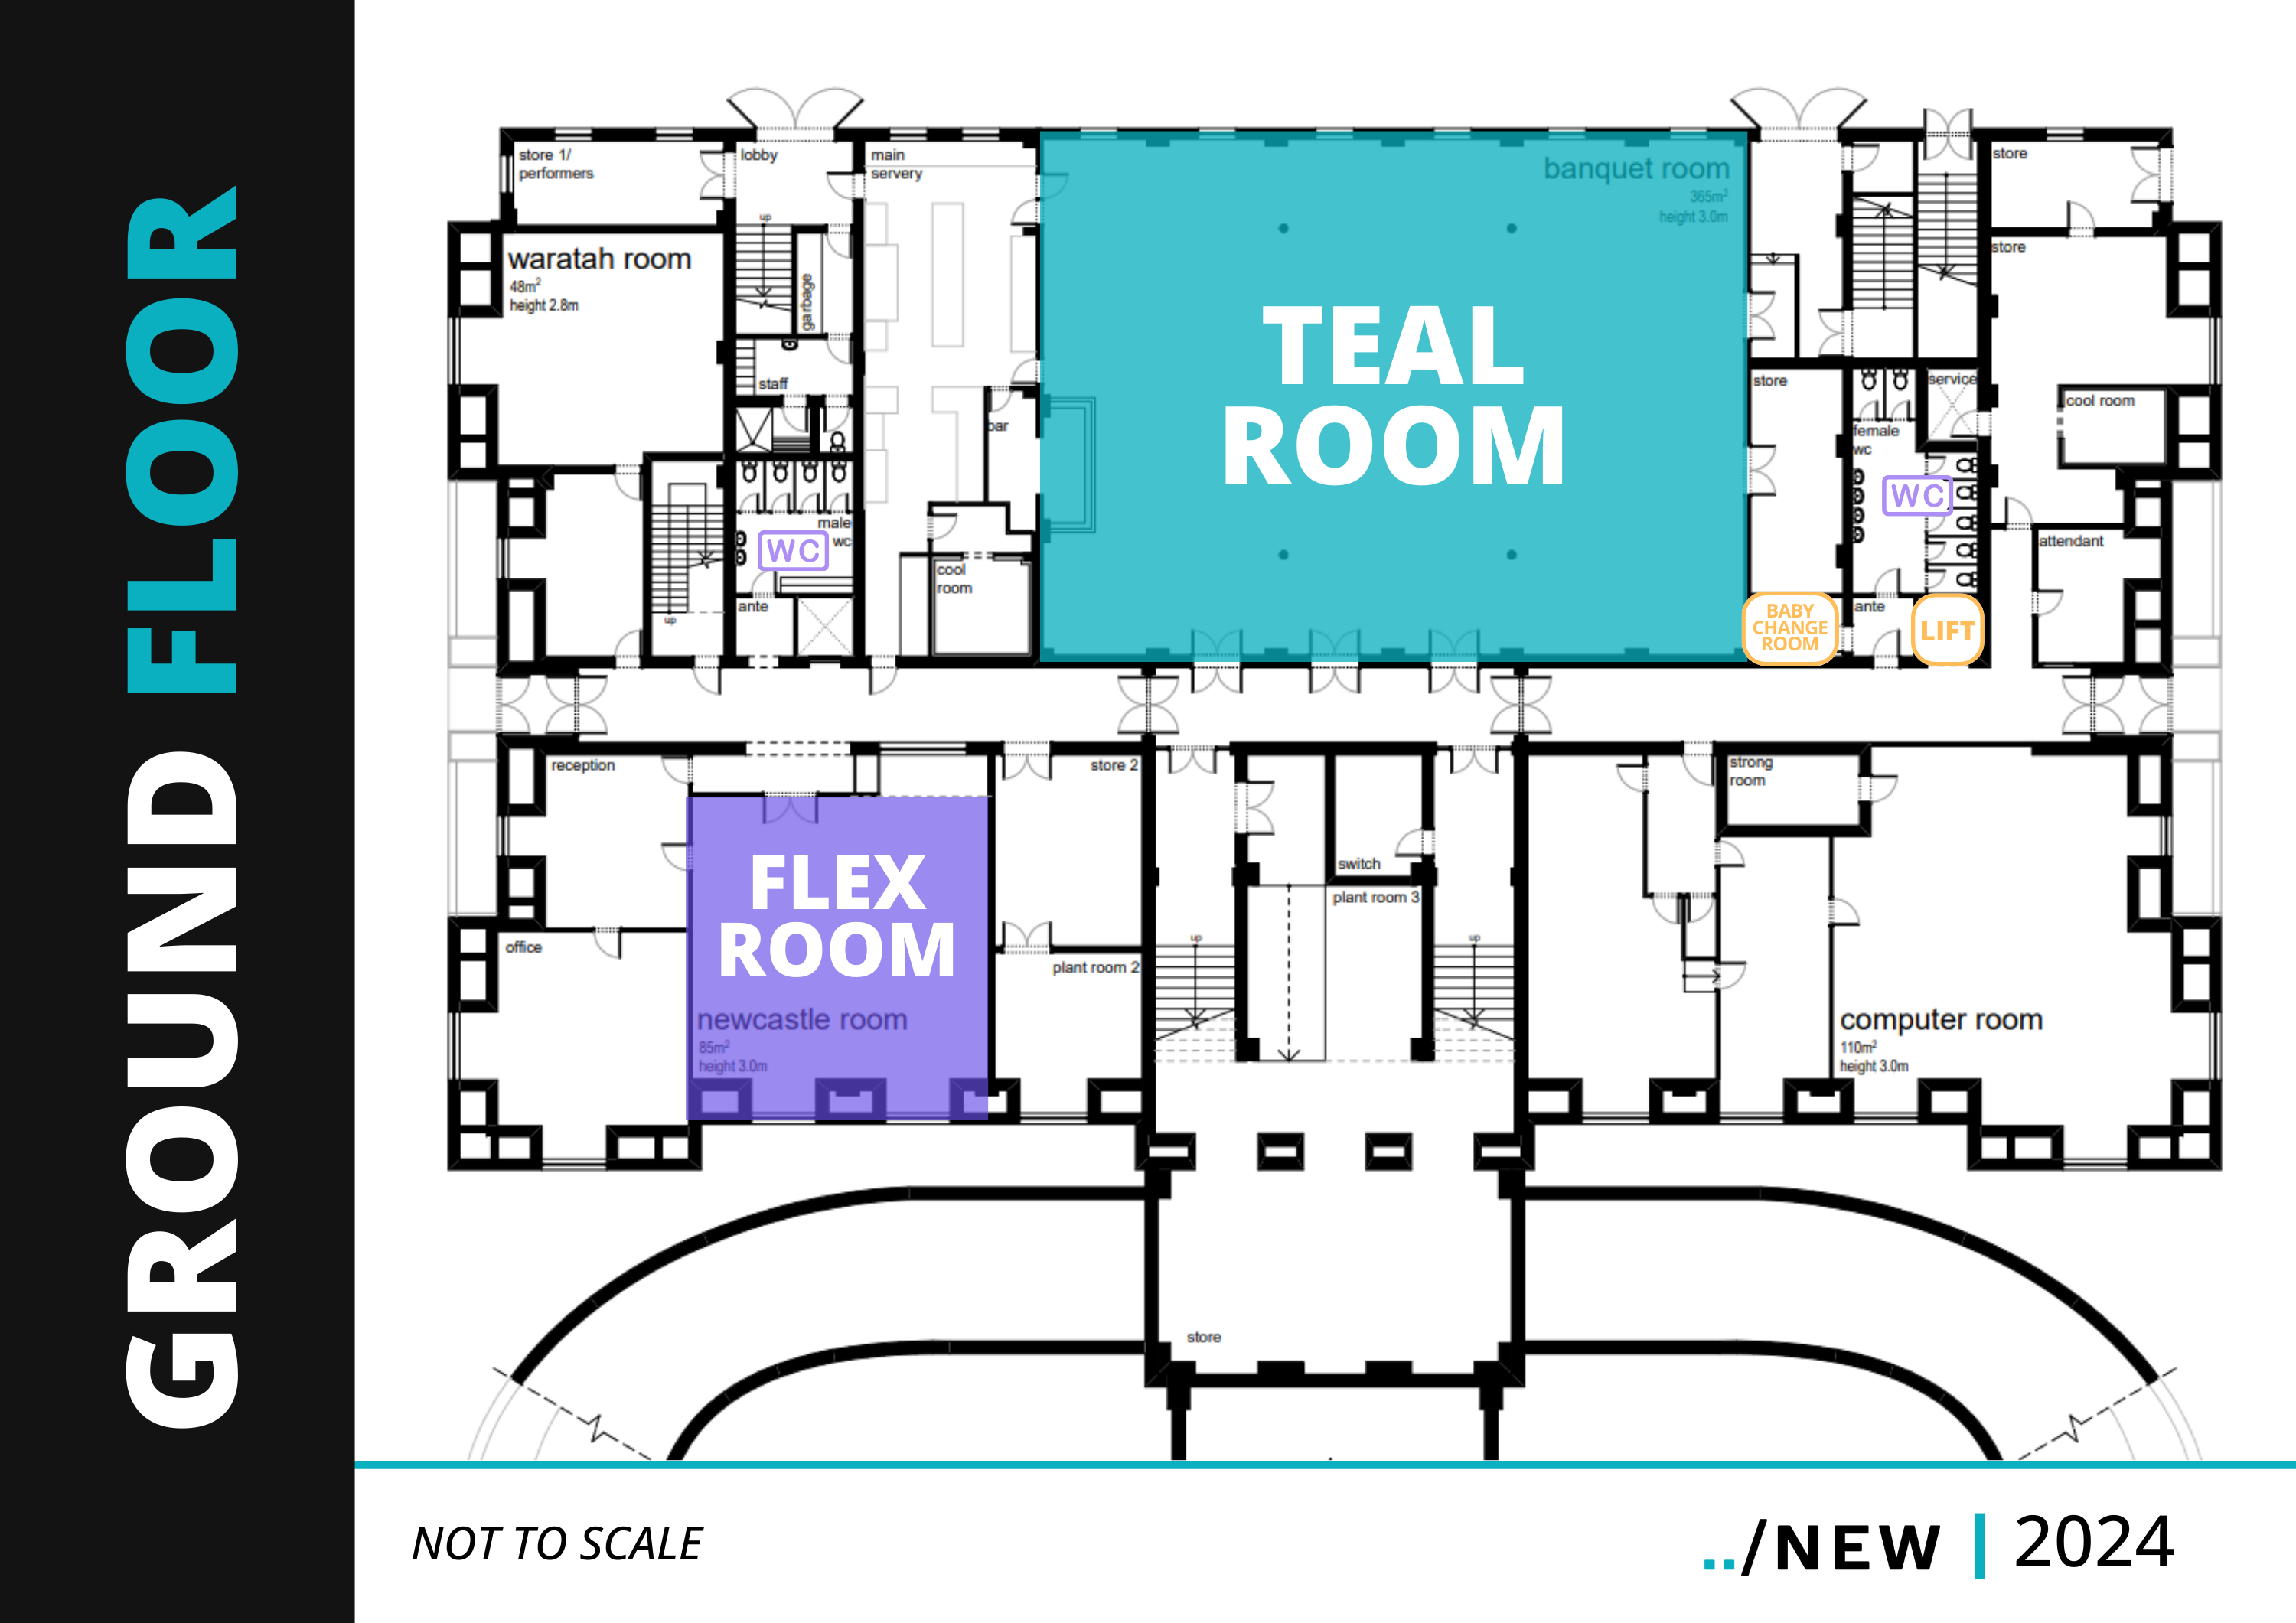 Ground floor map of the venue